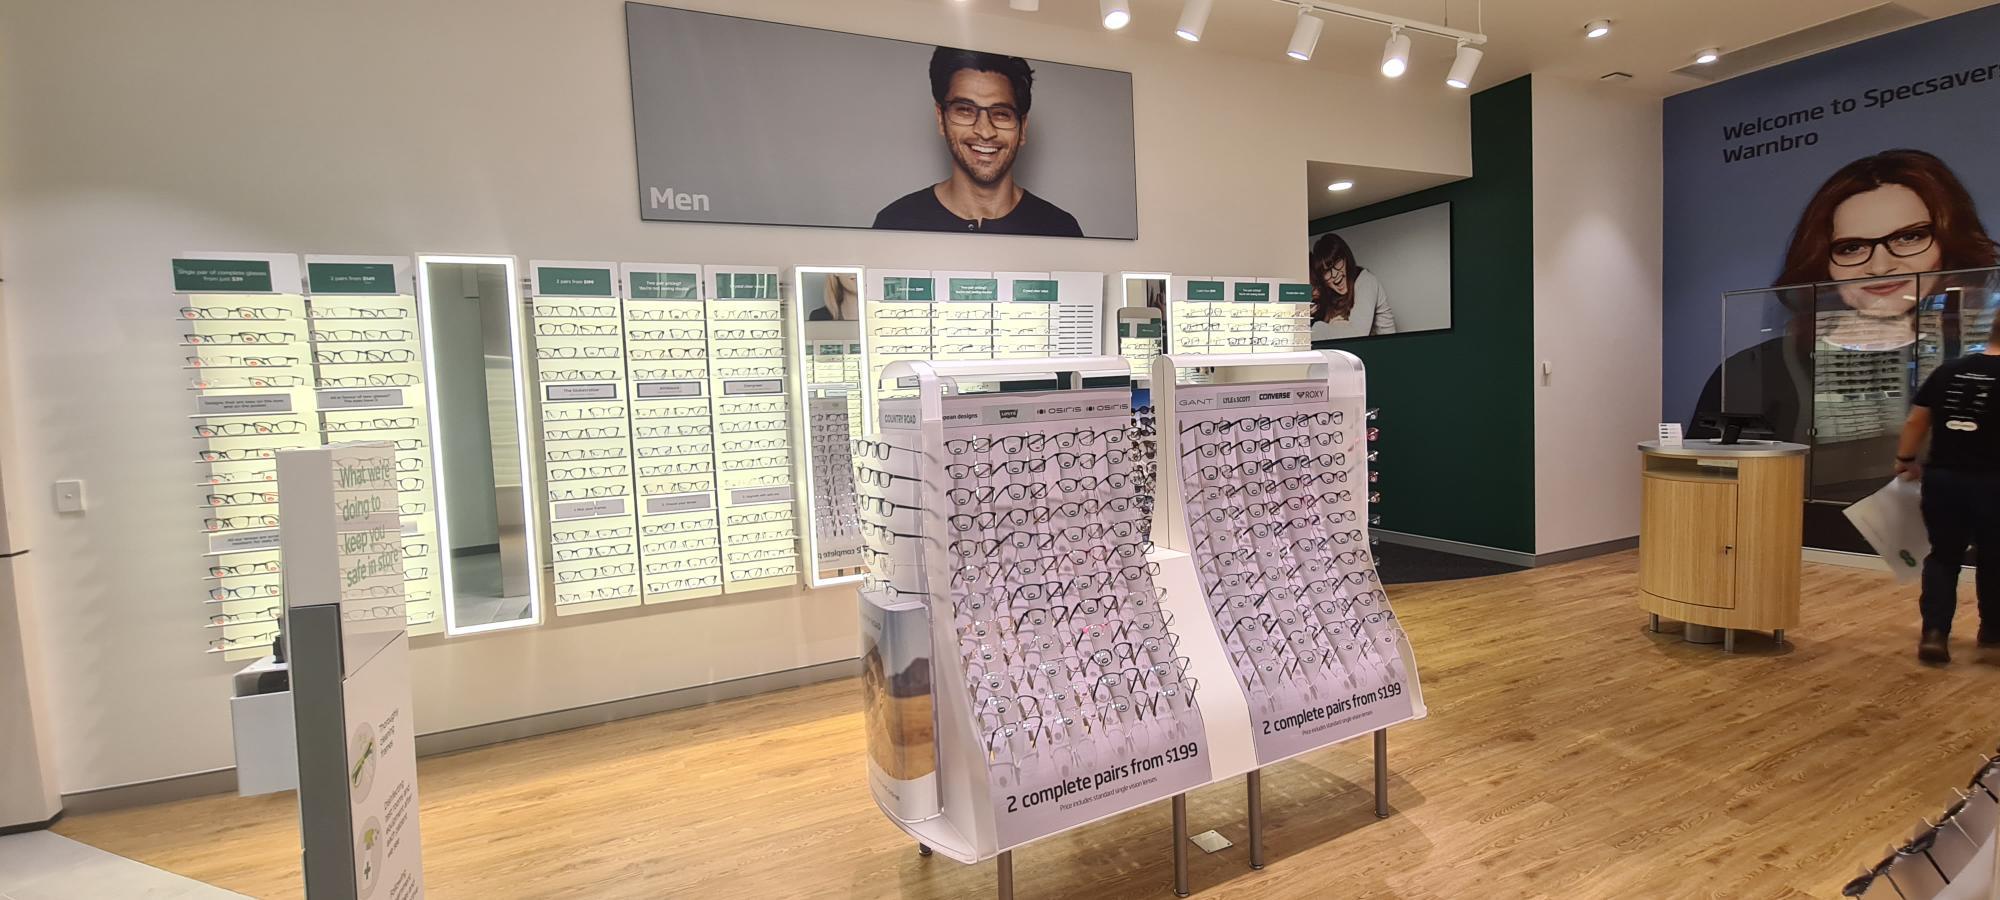 Images Specsavers Optometrists - Warnbro Centre & Audiology